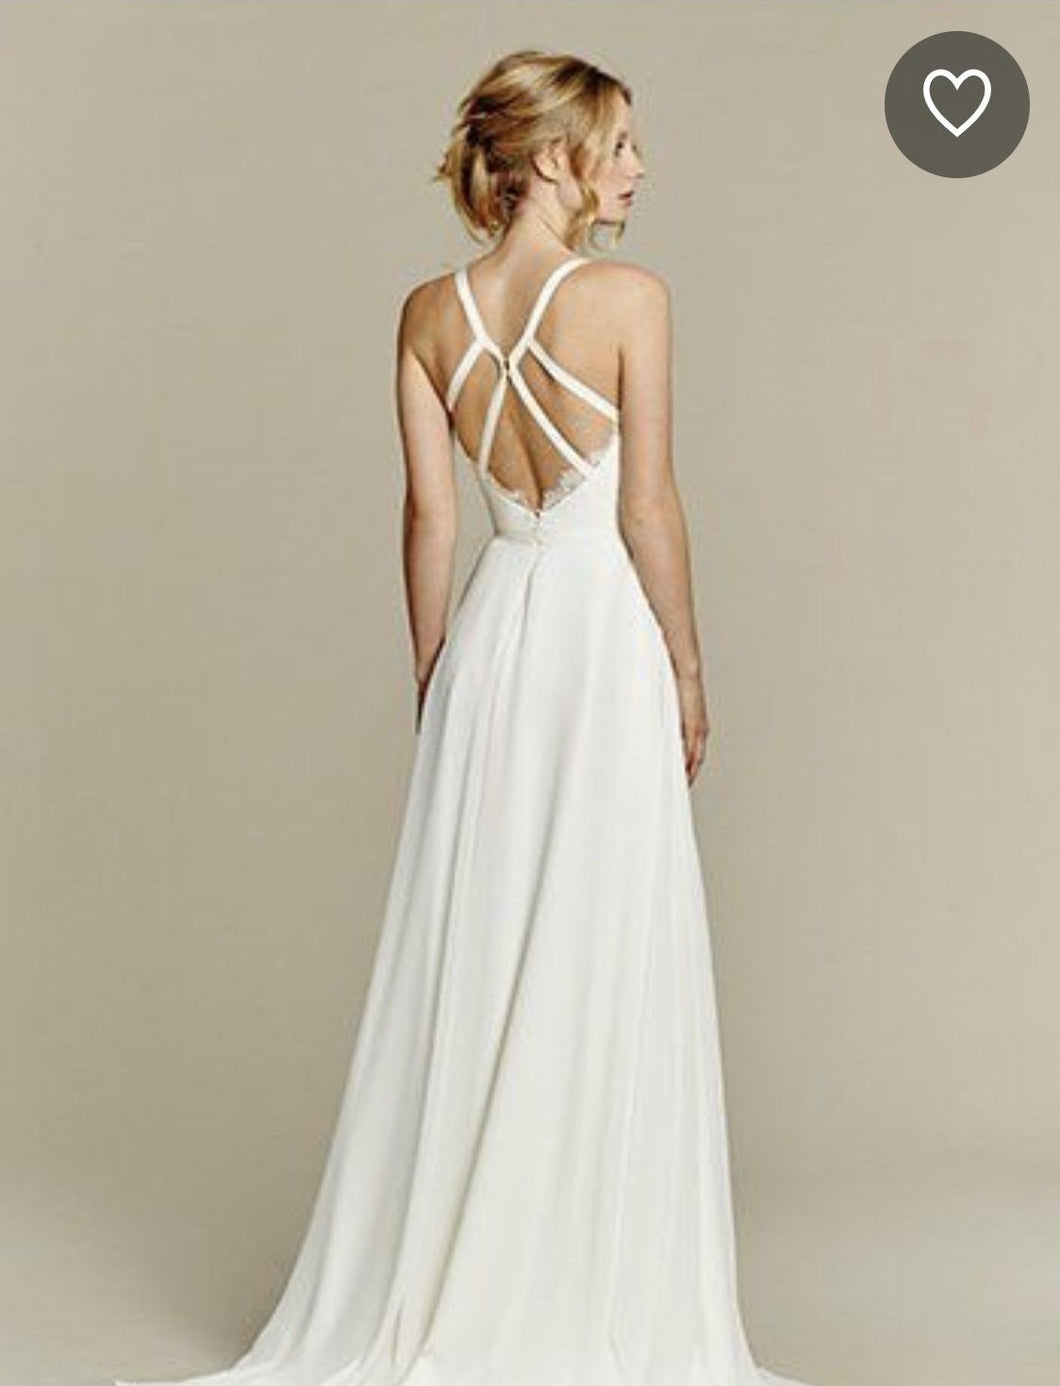 Hayley Paige 'Palermo' size 12 used wedding dress back view on model